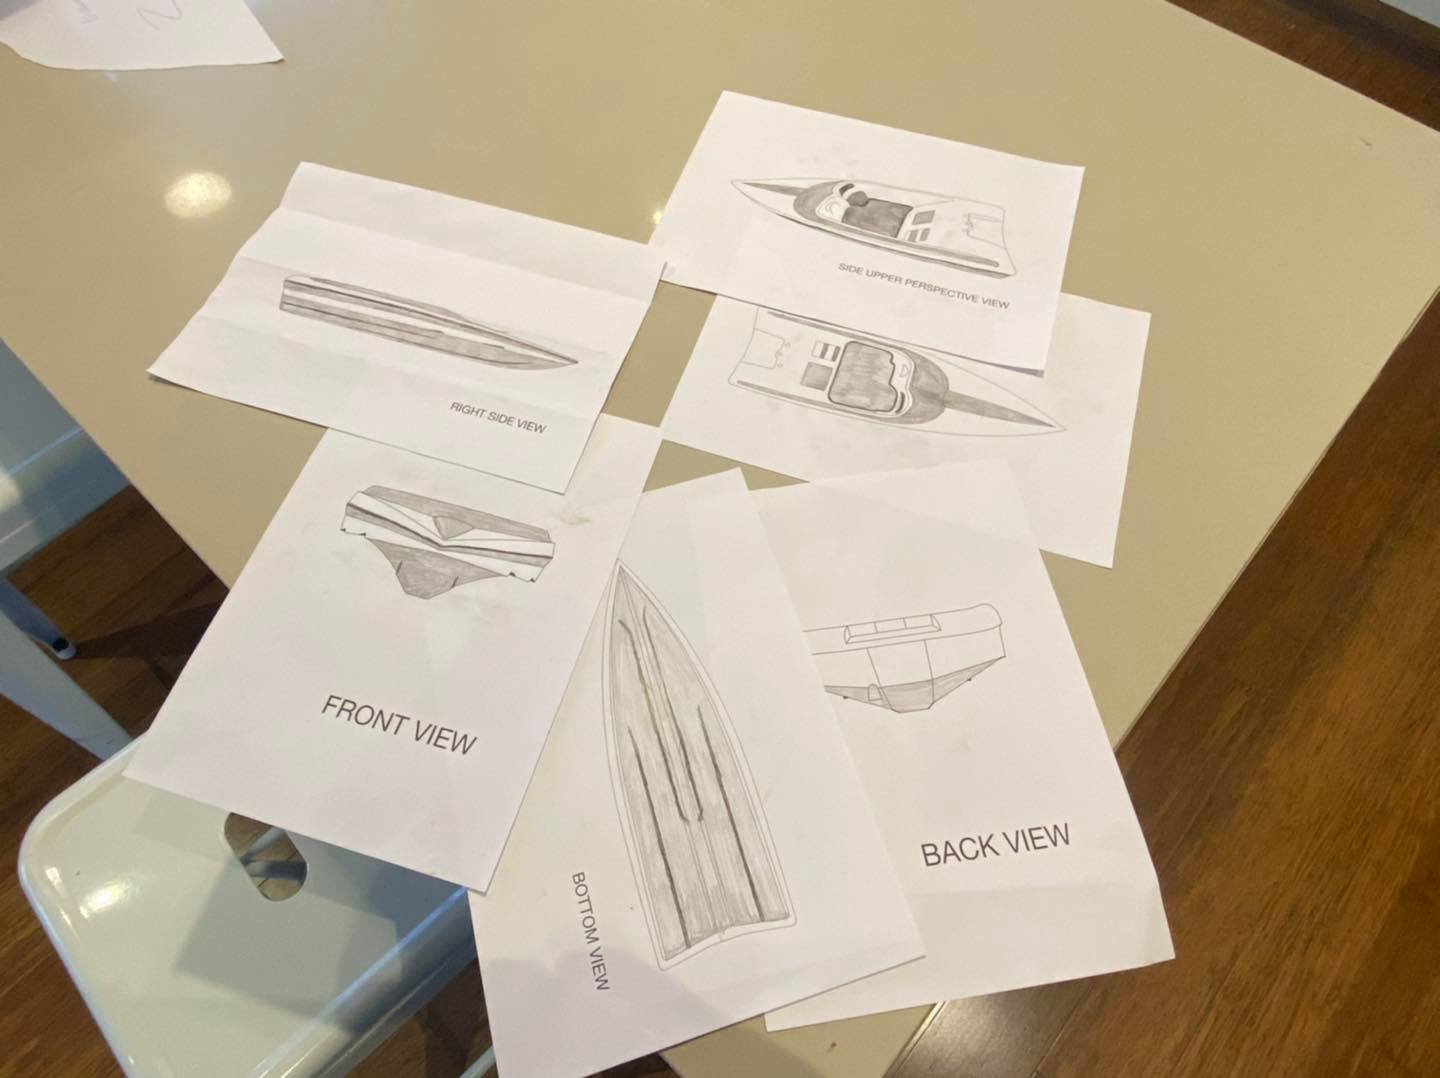 Helping to recognise your boating dreams is one of the best feelings we get here at Force Boats. The process starts with your colour selection. Keep your eye on this page to see how this Force comes to life!